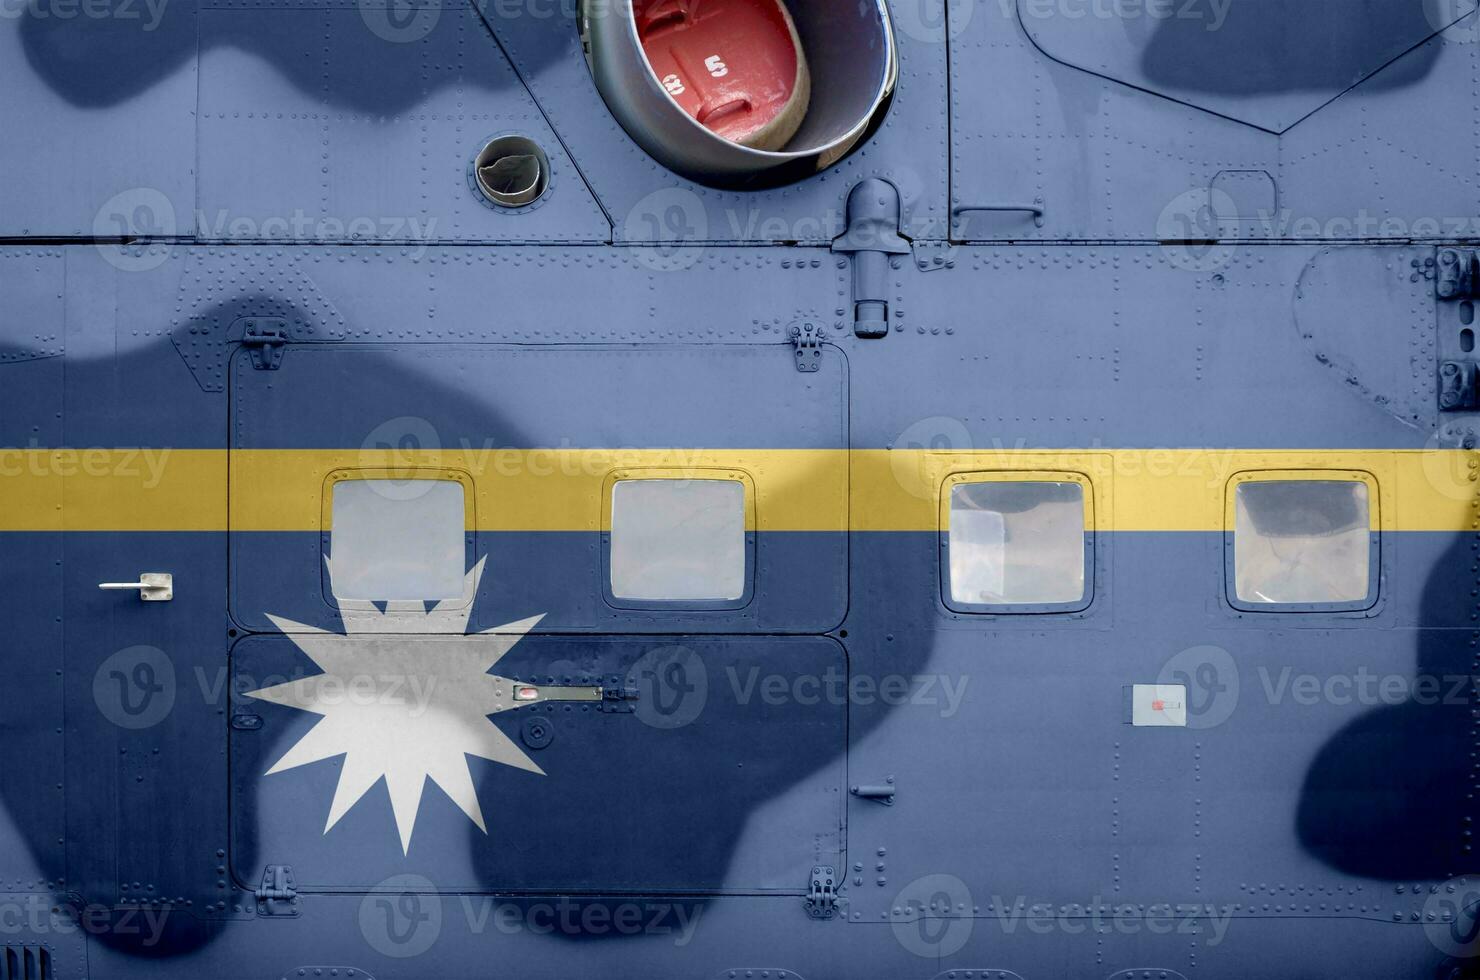 Nauru flag depicted on side part of military armored helicopter closeup. Army forces aircraft conceptual background photo